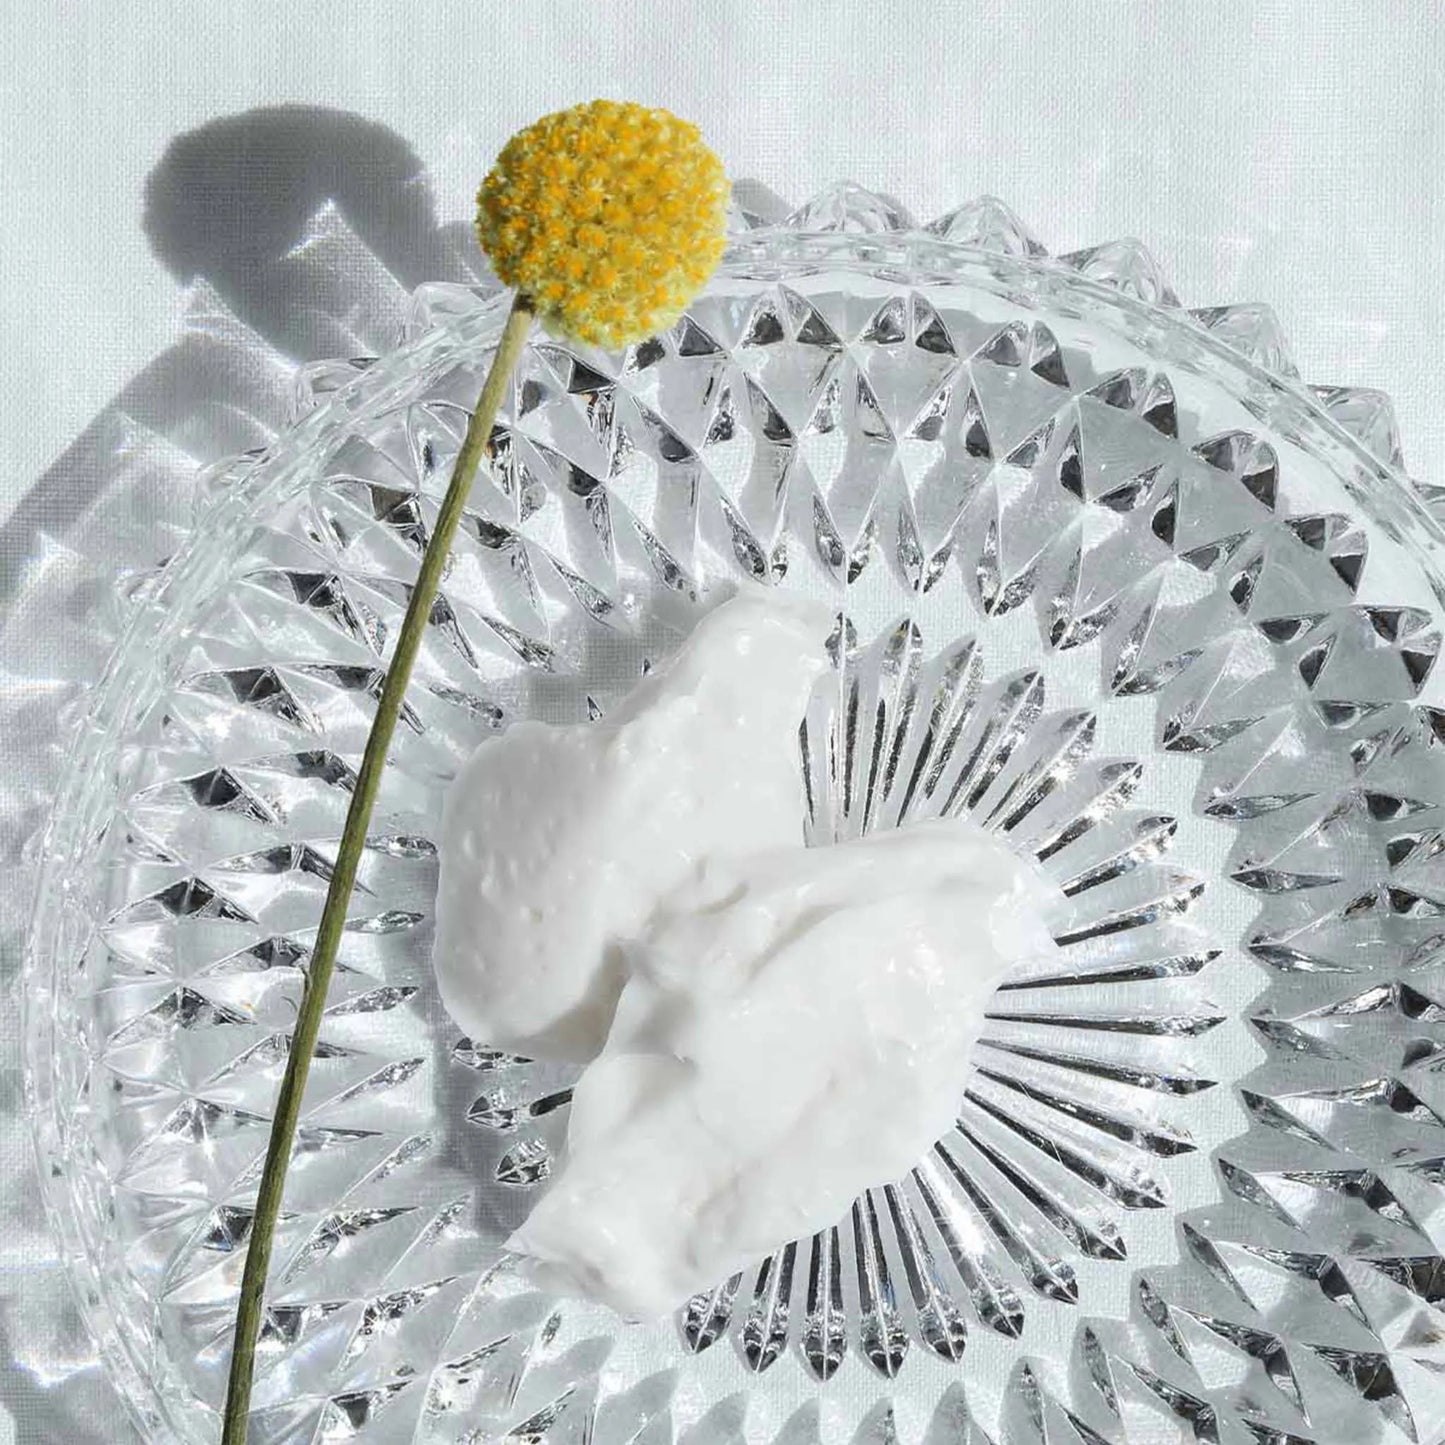 the cream is in a bowl and a yellow flower lays on to of it